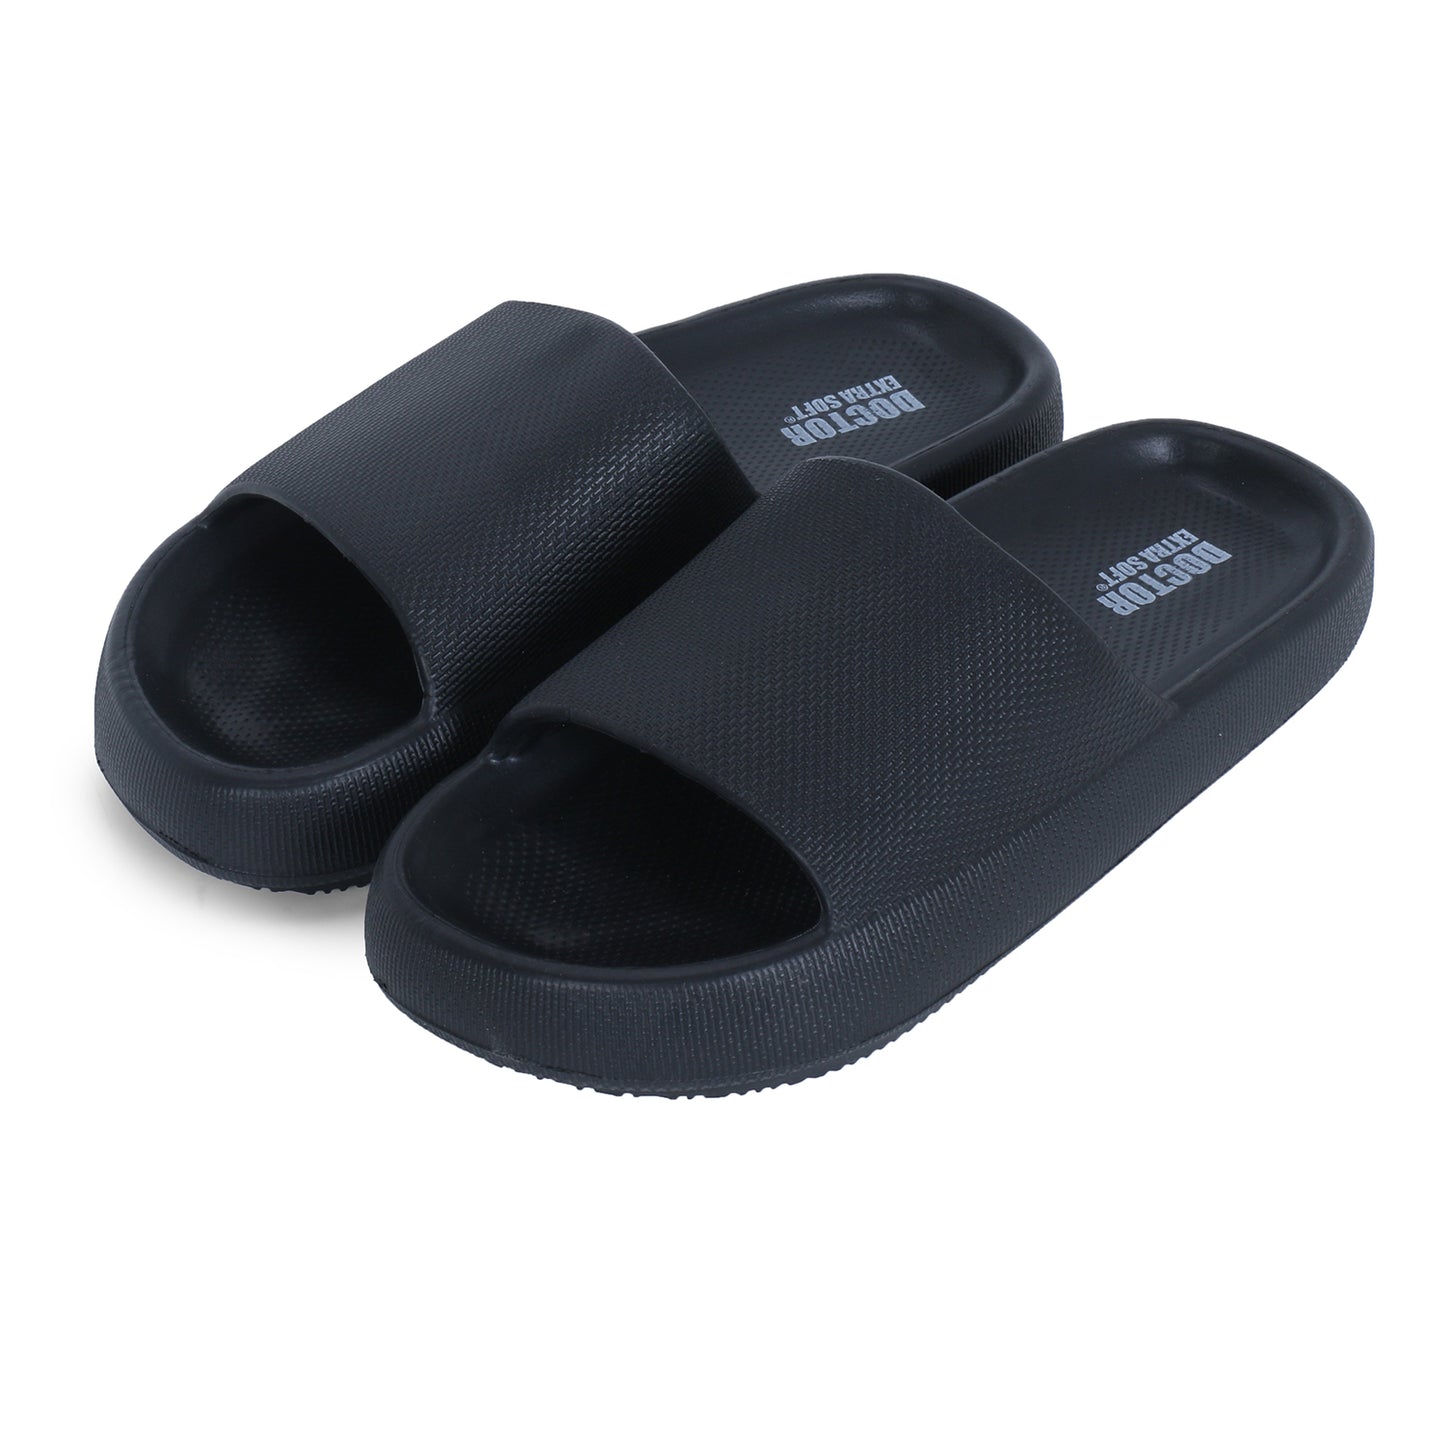 DOCTOR EXTRA SOFT D-504 Men's Classic Ultra Soft Sliders/Slippers with Cushion FootBed for Adult | Comfortable & Light Weight | Stylish & Anti-Skid | Waterproof & Everyday Flip Flops for Gents/Boy